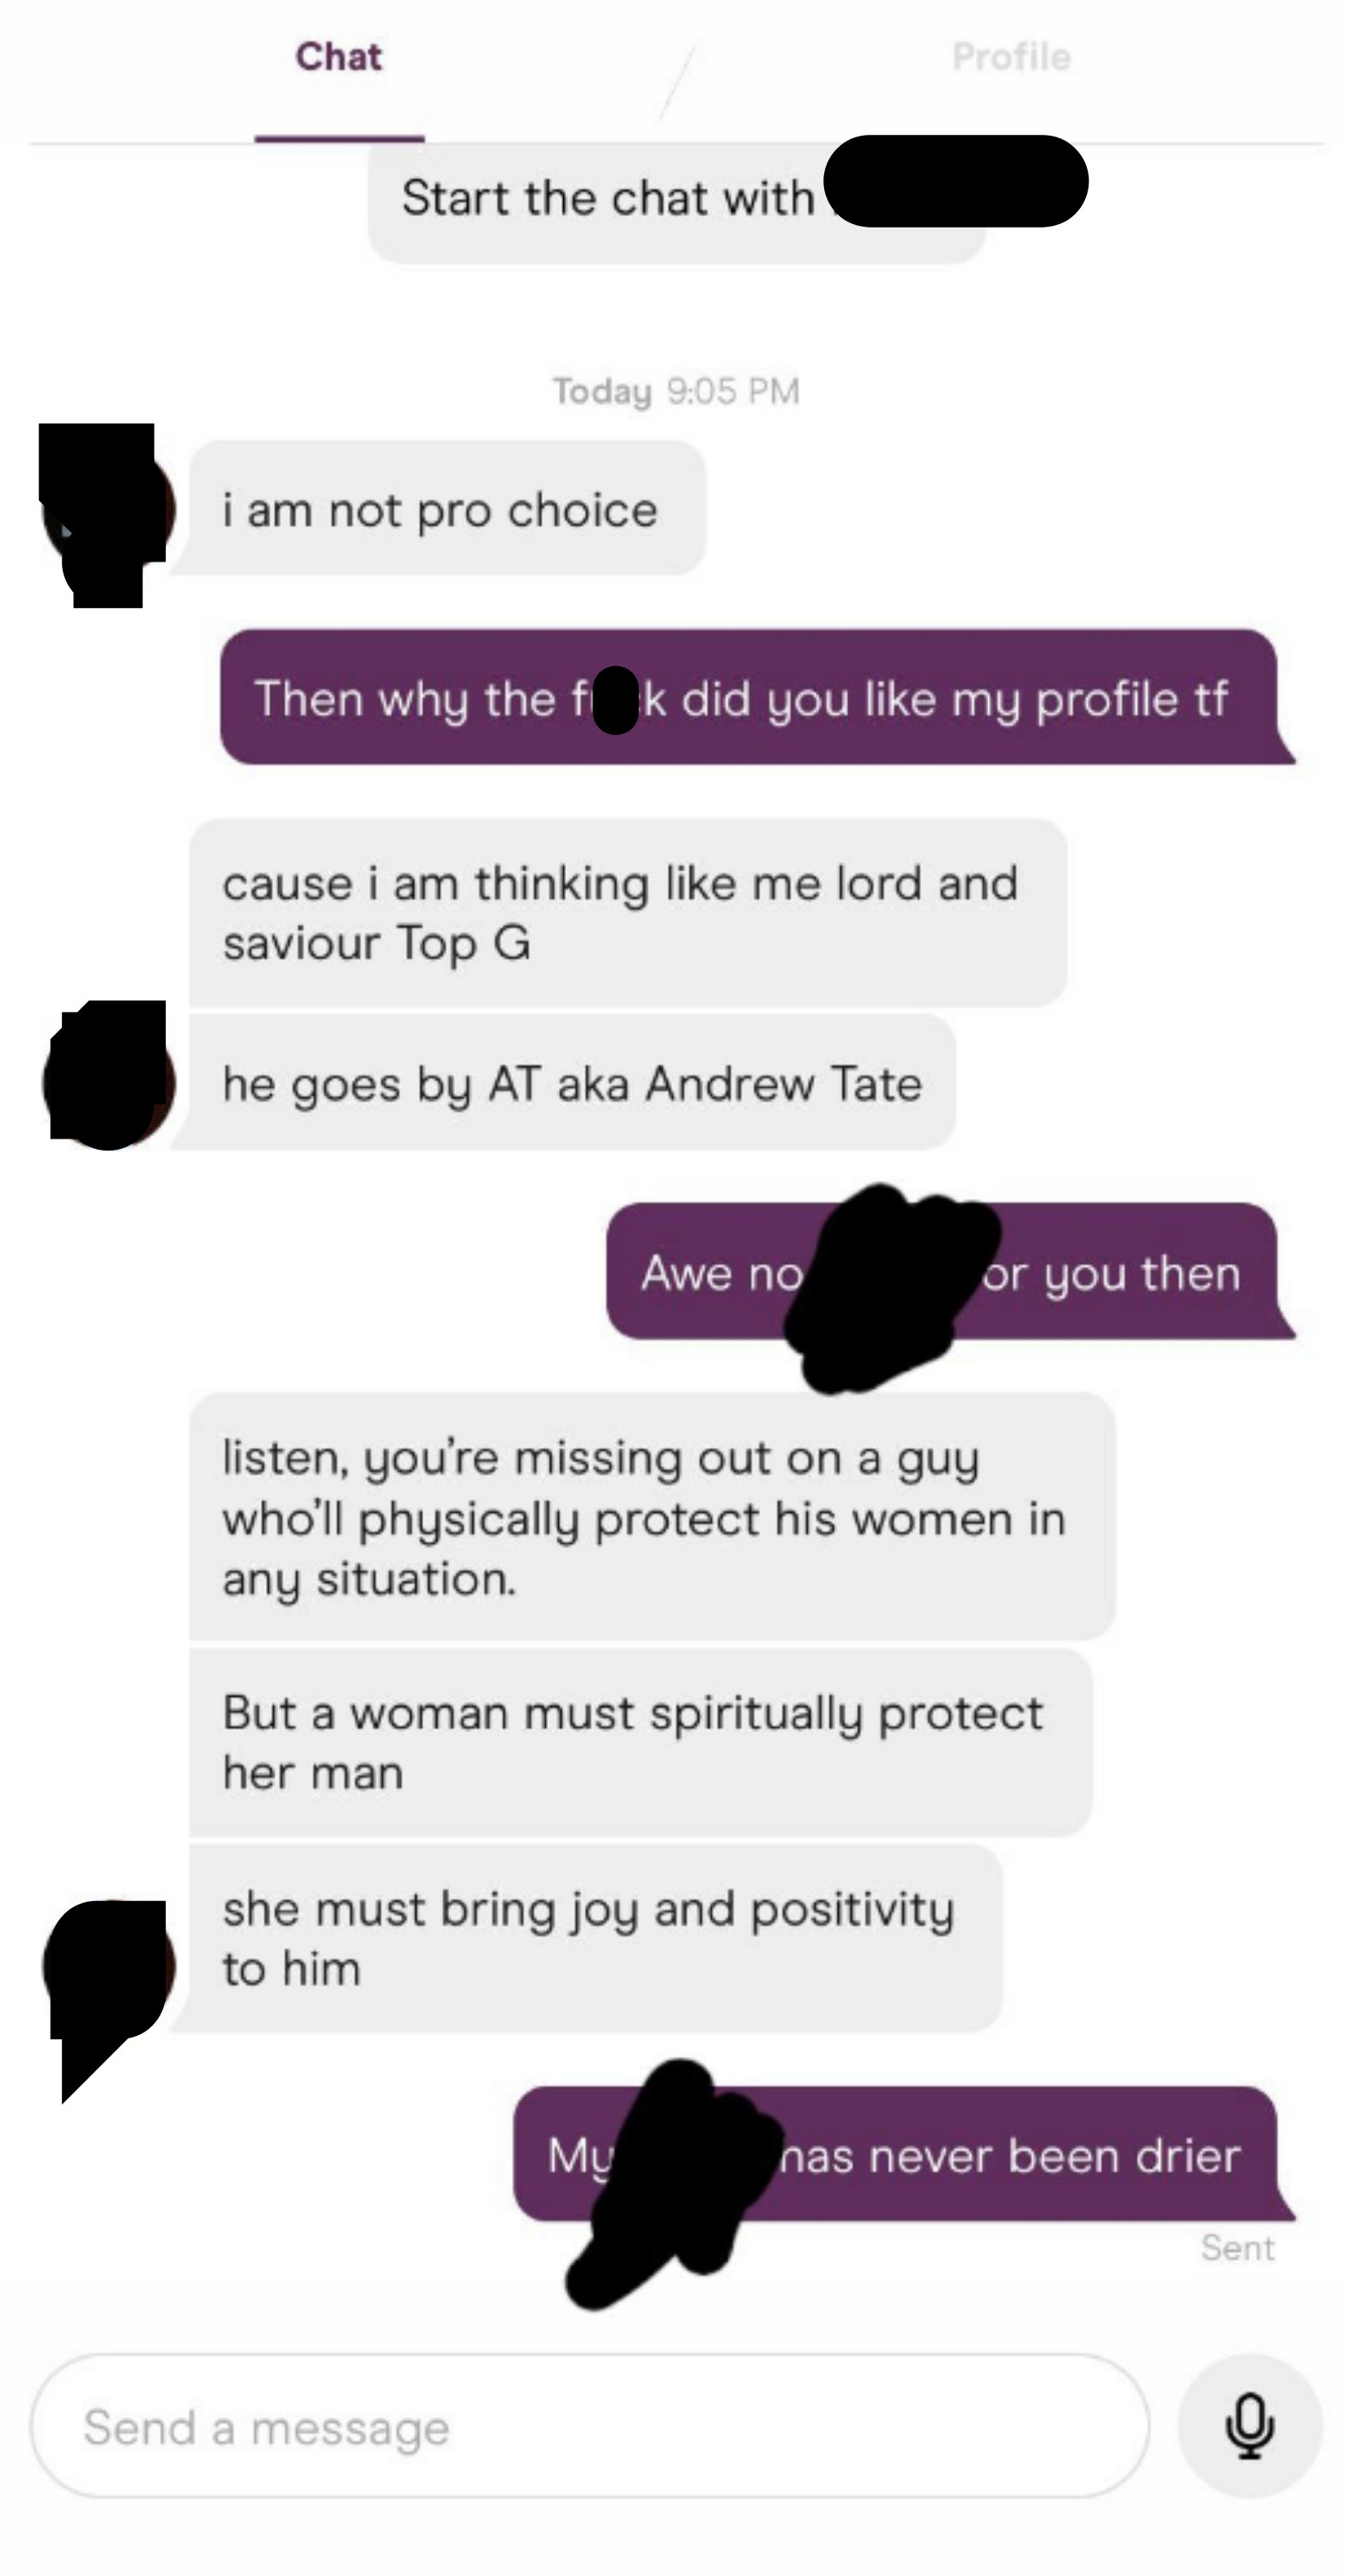 A man opens conversation by saying he&#x27;s not pro-choice, then goes on to say he follows Andrew Tate and that he can physically protect women but they must spiritually protect him